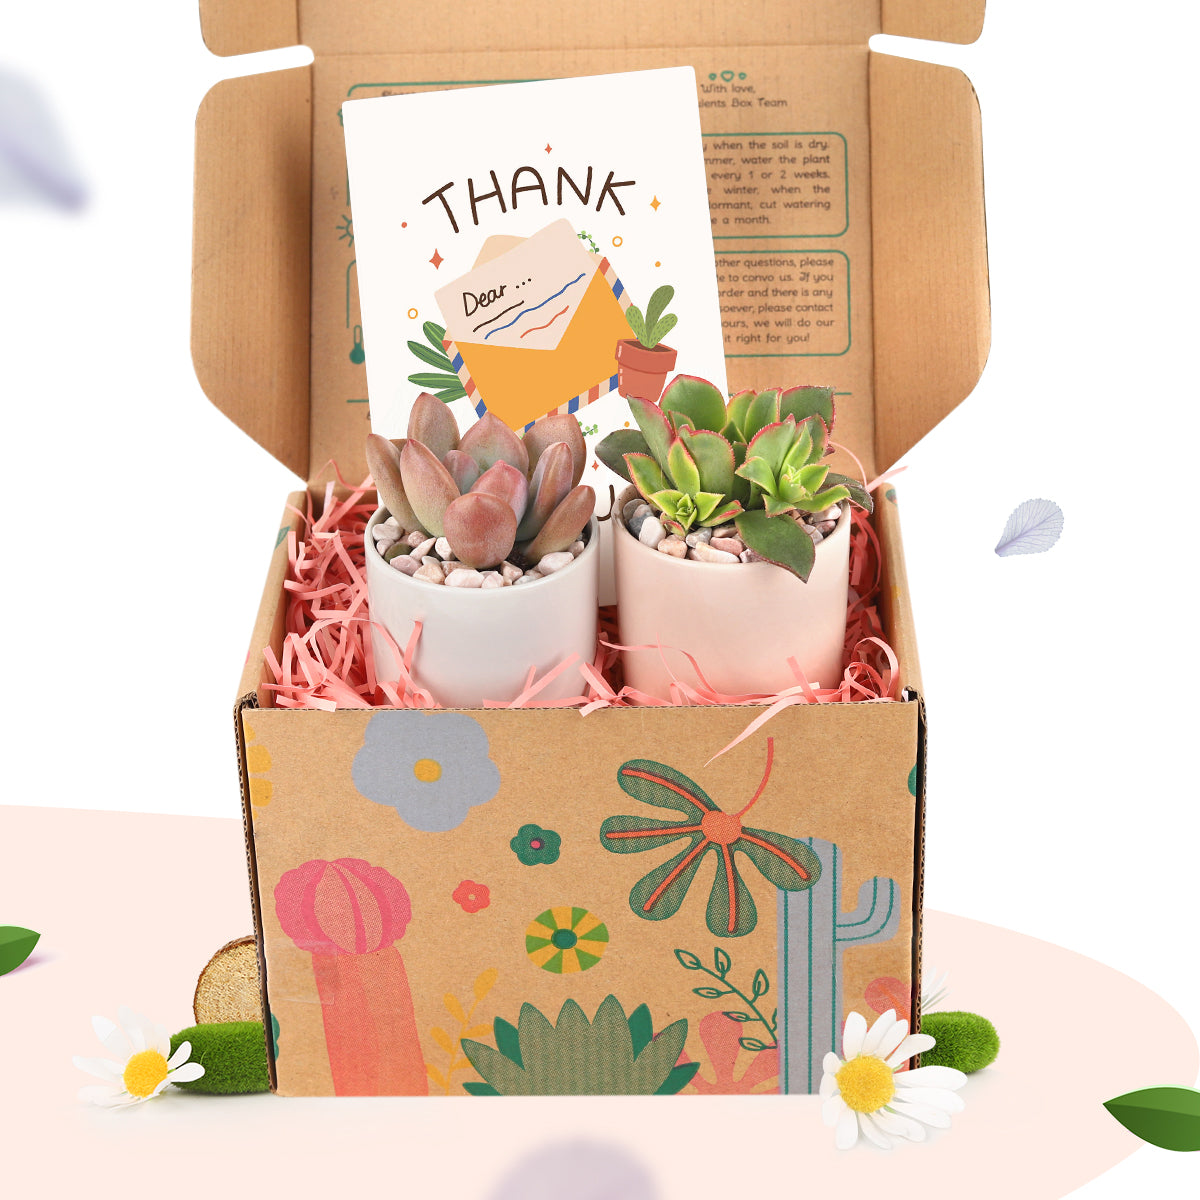 live succulent gift boxes for sale online, succulent plant gift ideas, Memorable gifts for any occasion.